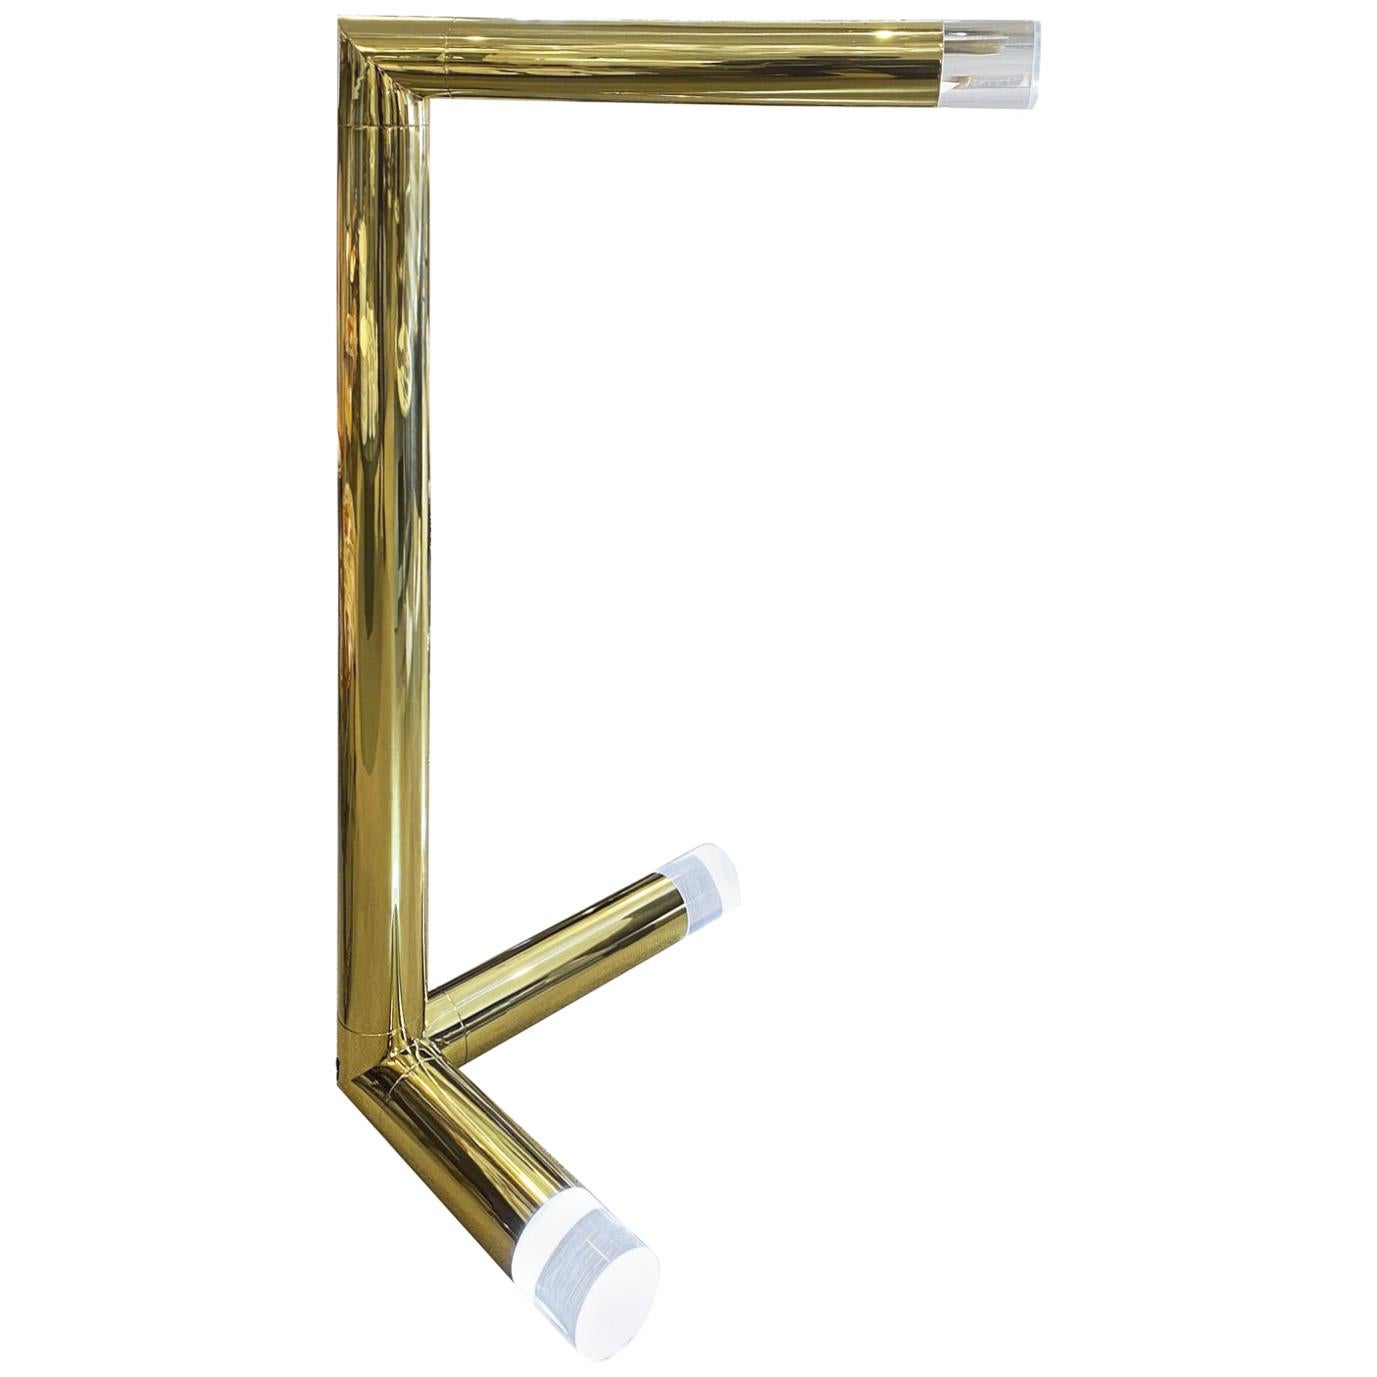 Karl Springer Rare "Sculpture Floor Lamp" in Brass and Lucite, 1970s